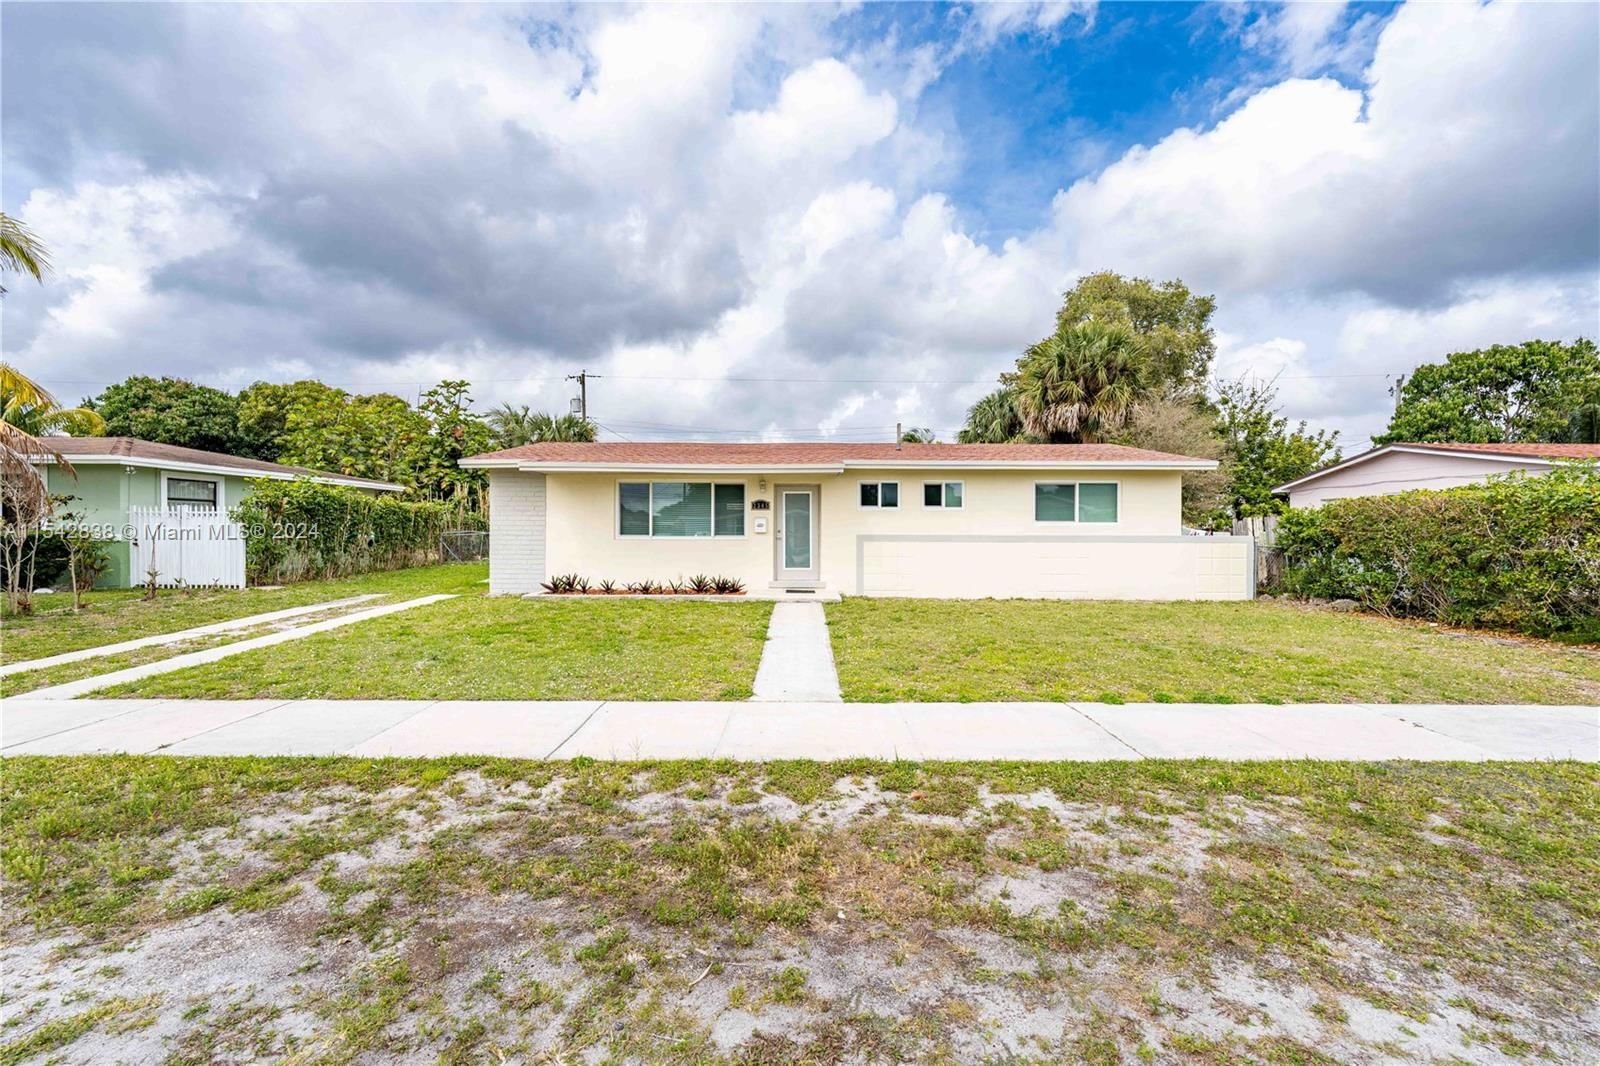 Real estate property located at 2345 182nd Ter, Miami-Dade County, HALL CREST GDNS, Miami Gardens, FL